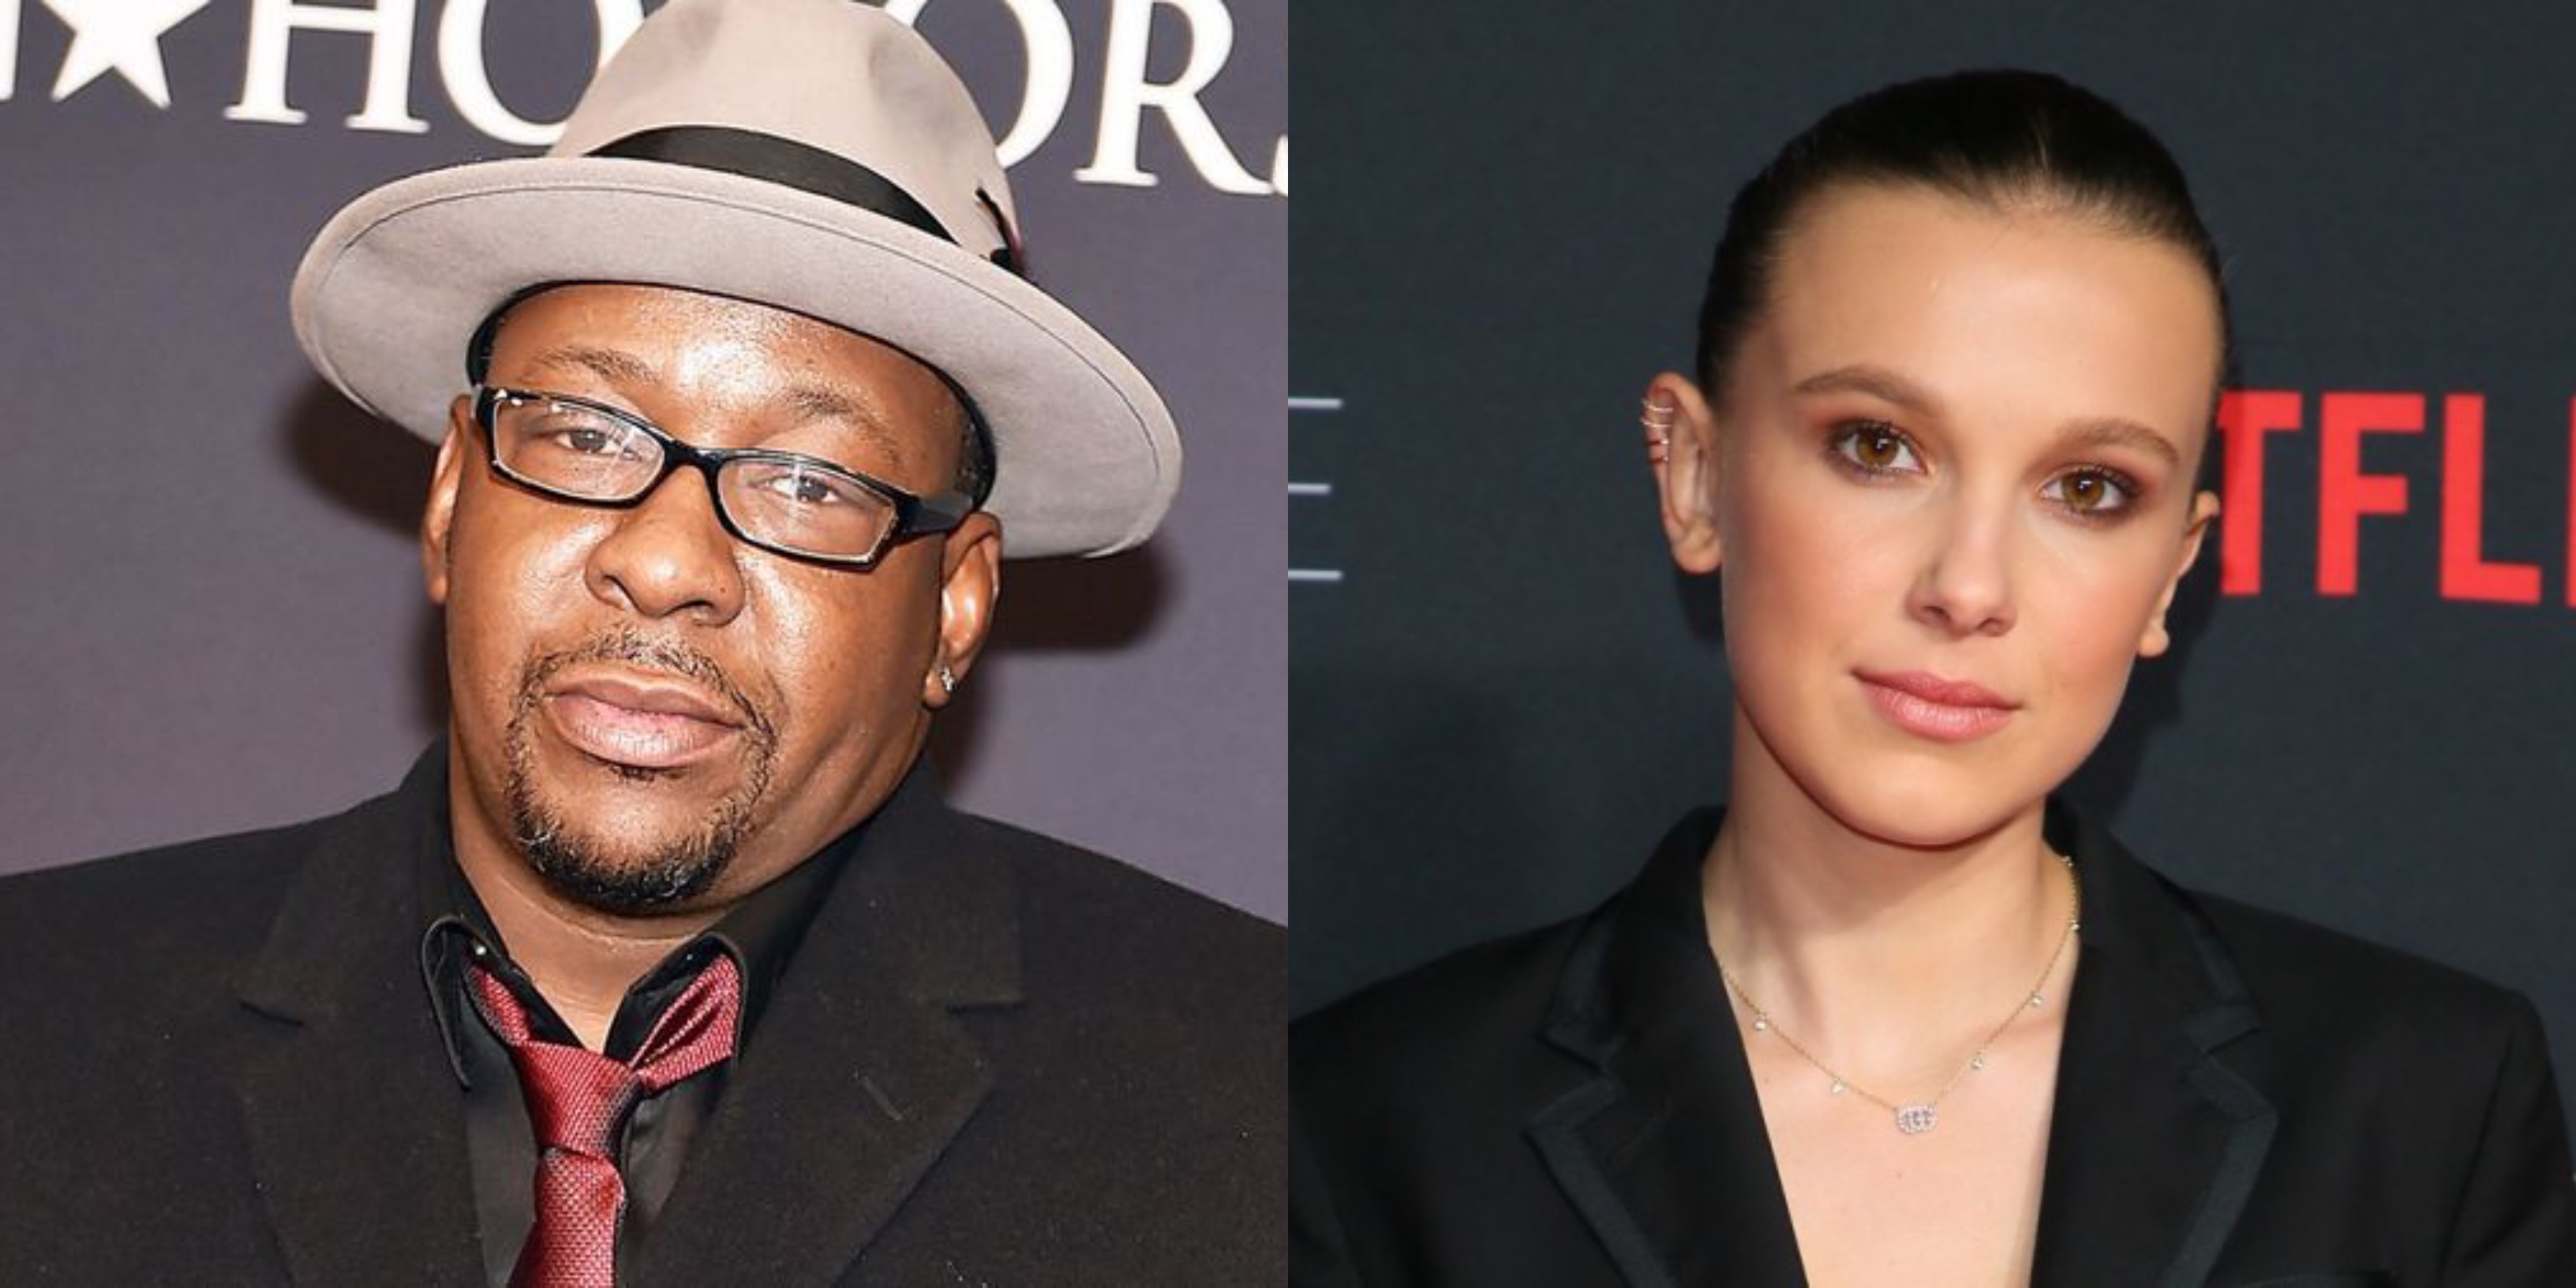 Bobby Brown meets Millie Bobby Brown at the Emmys